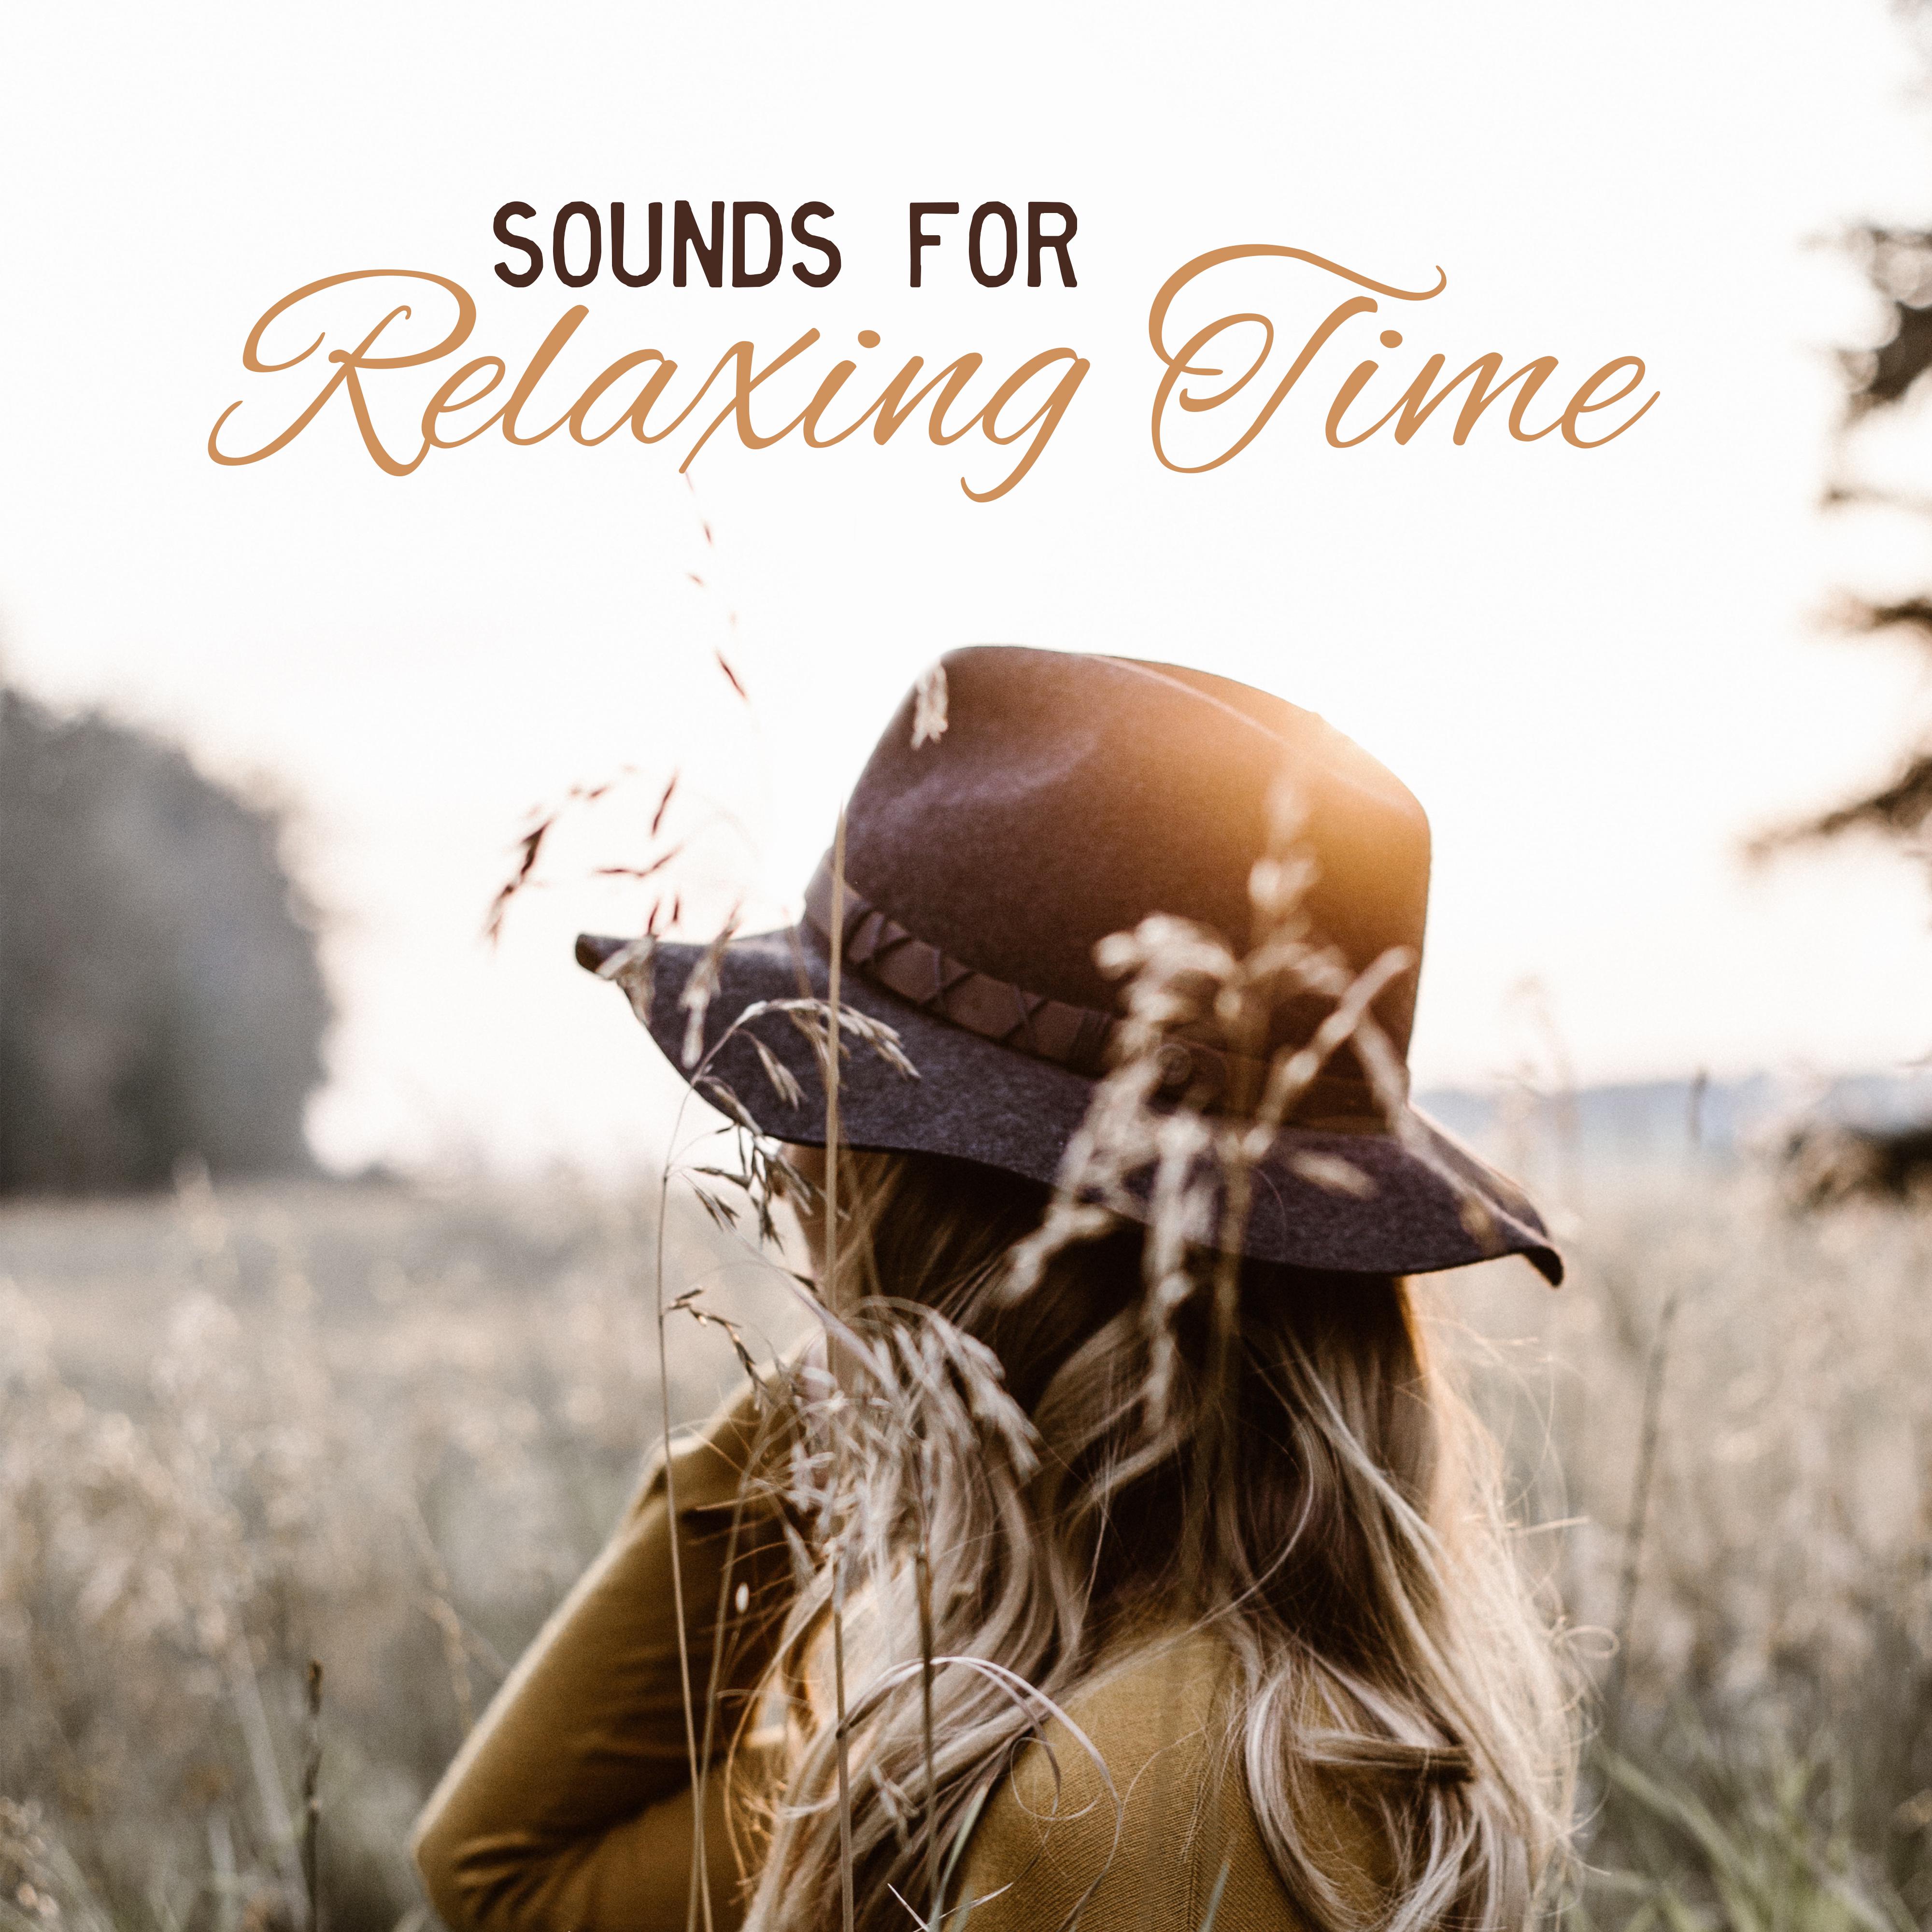 Sounds for Relaxing Time